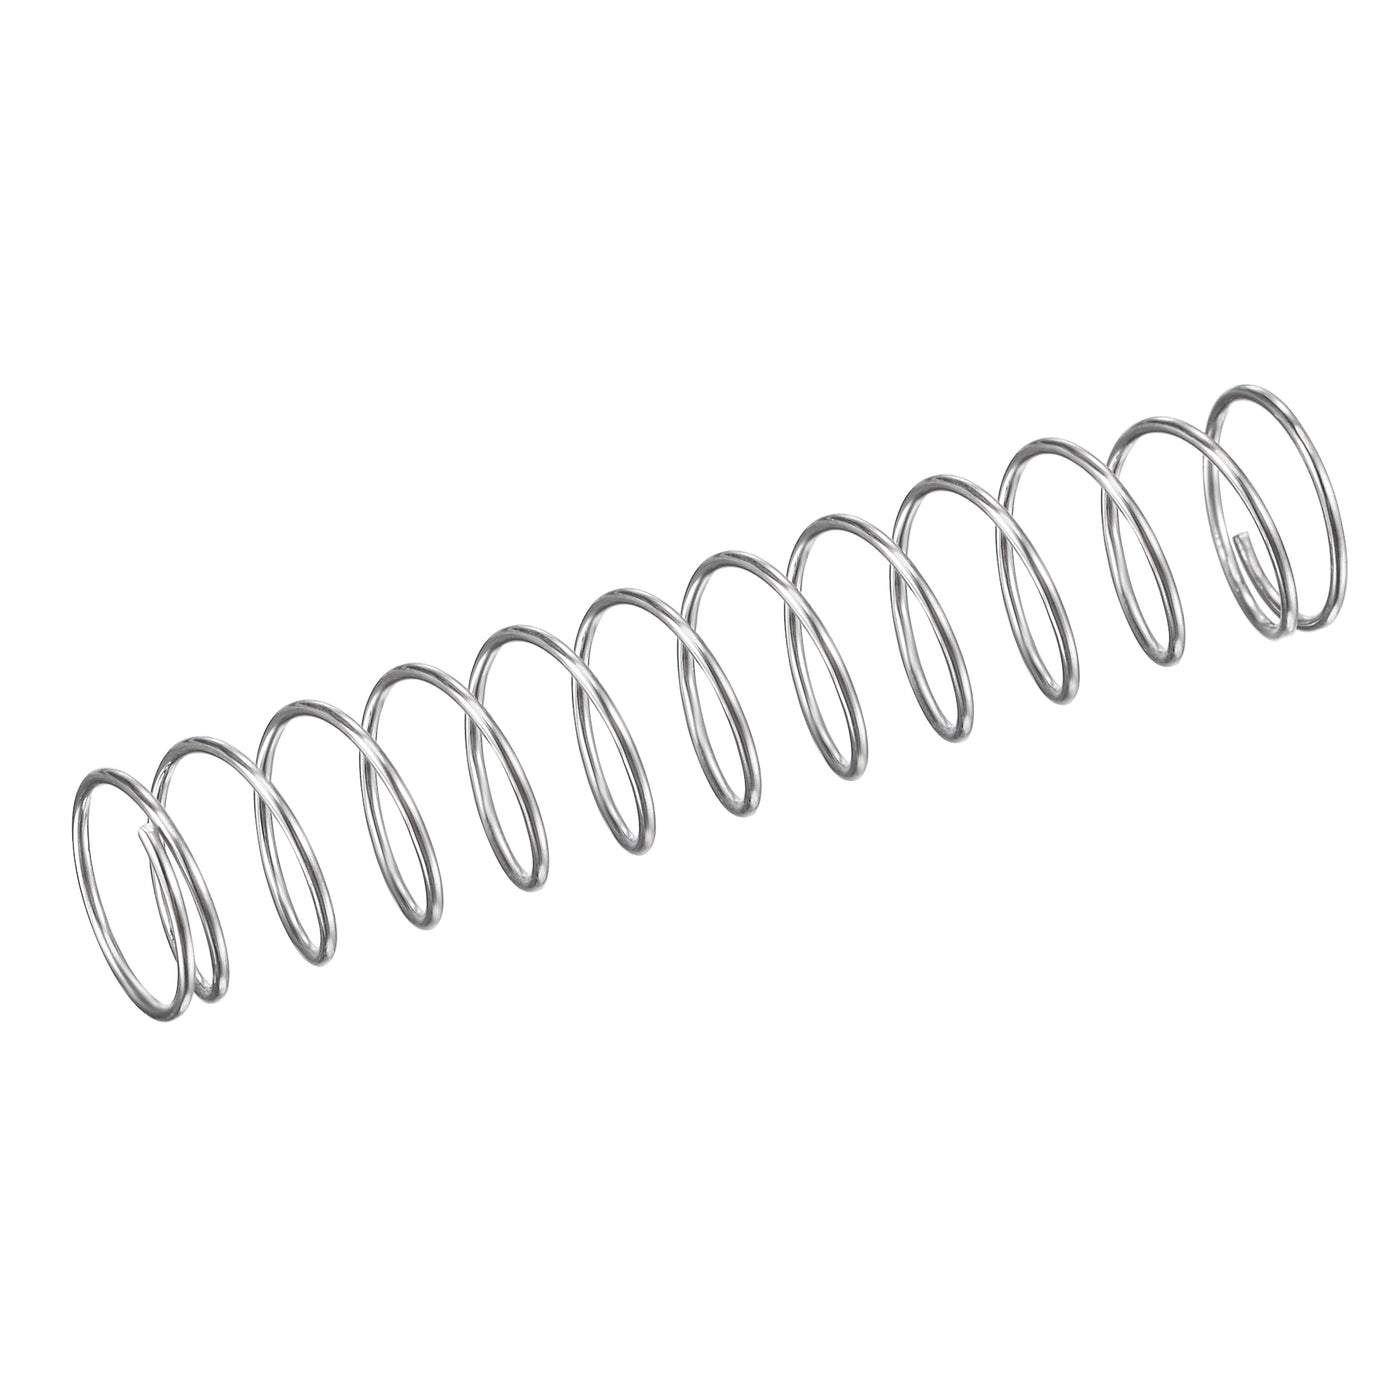 uxcell Uxcell 10mmx0.7mmx50mm 304 Stainless Steel Compression Spring 11.8N Load Capacity 5pcs